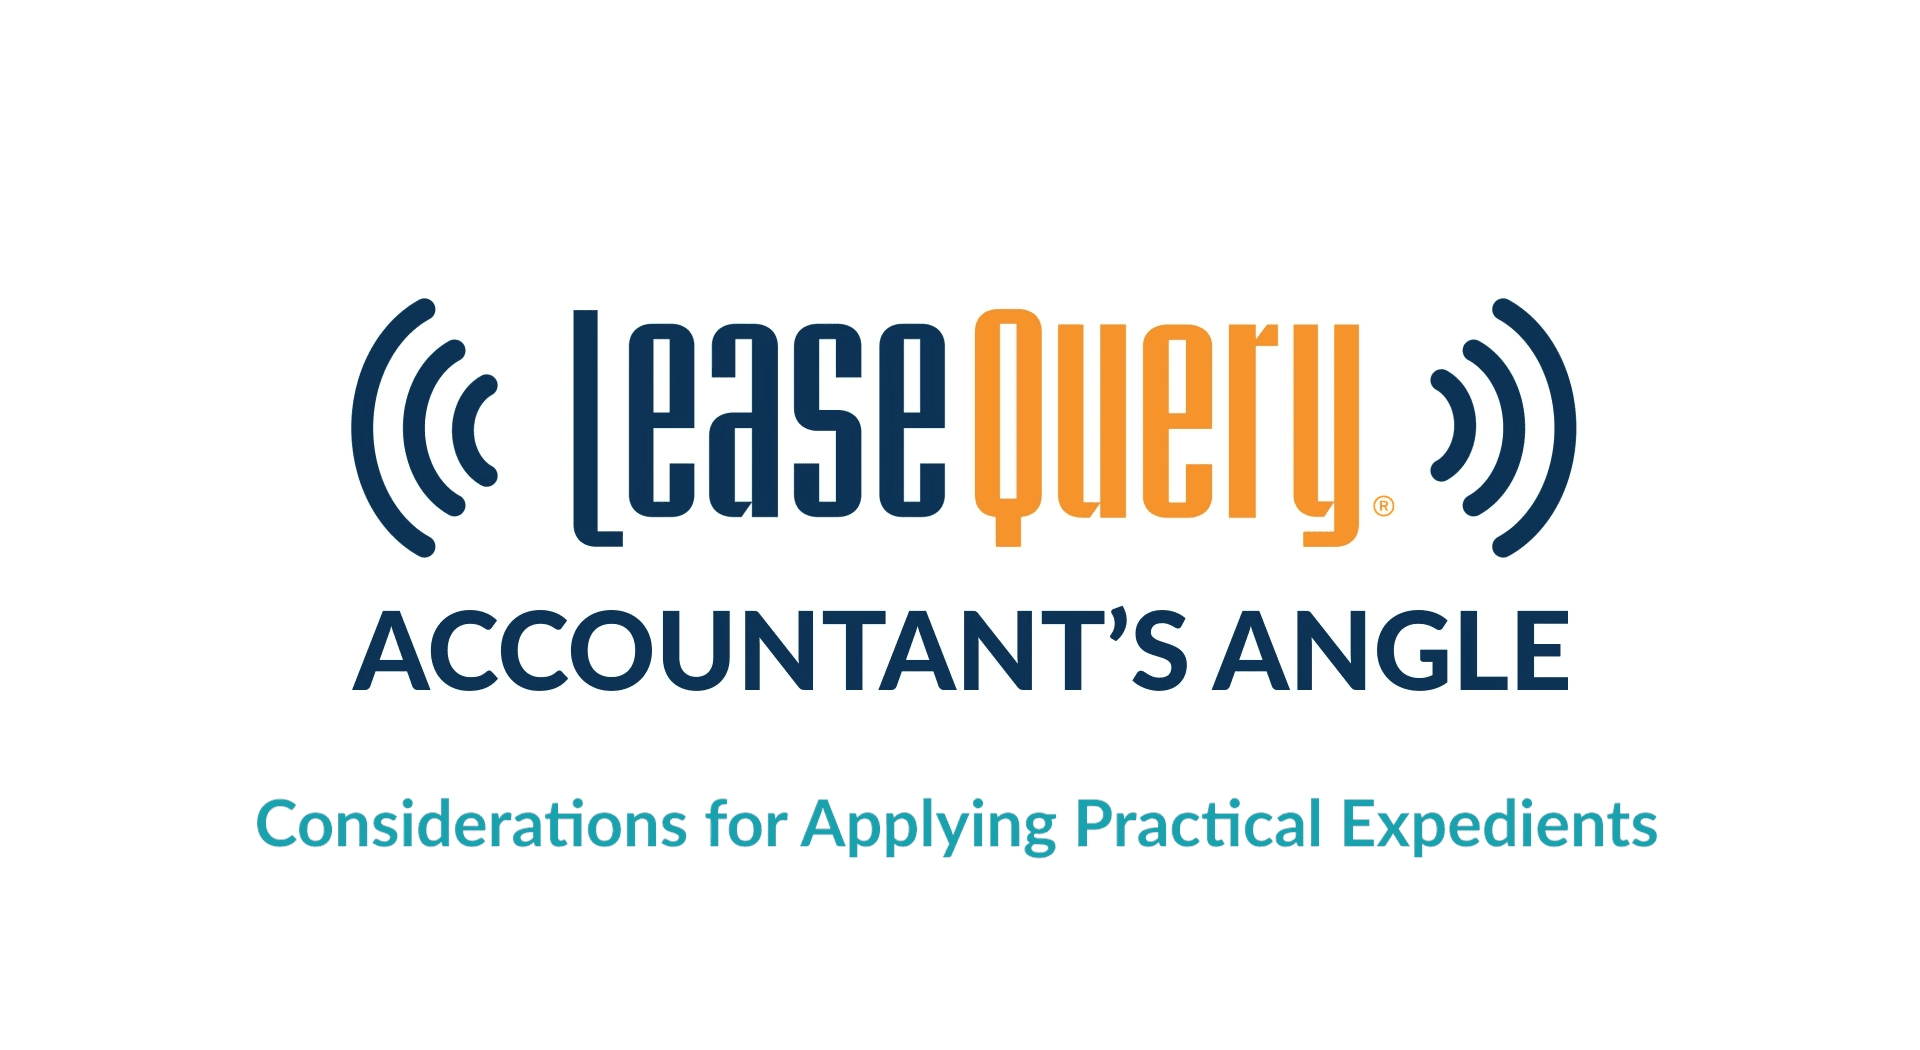 Episode 21: Considerations for Applying Practical Expedients with Chick-Fil-A and Grant Thornton | Accountant’s Angle Podcast